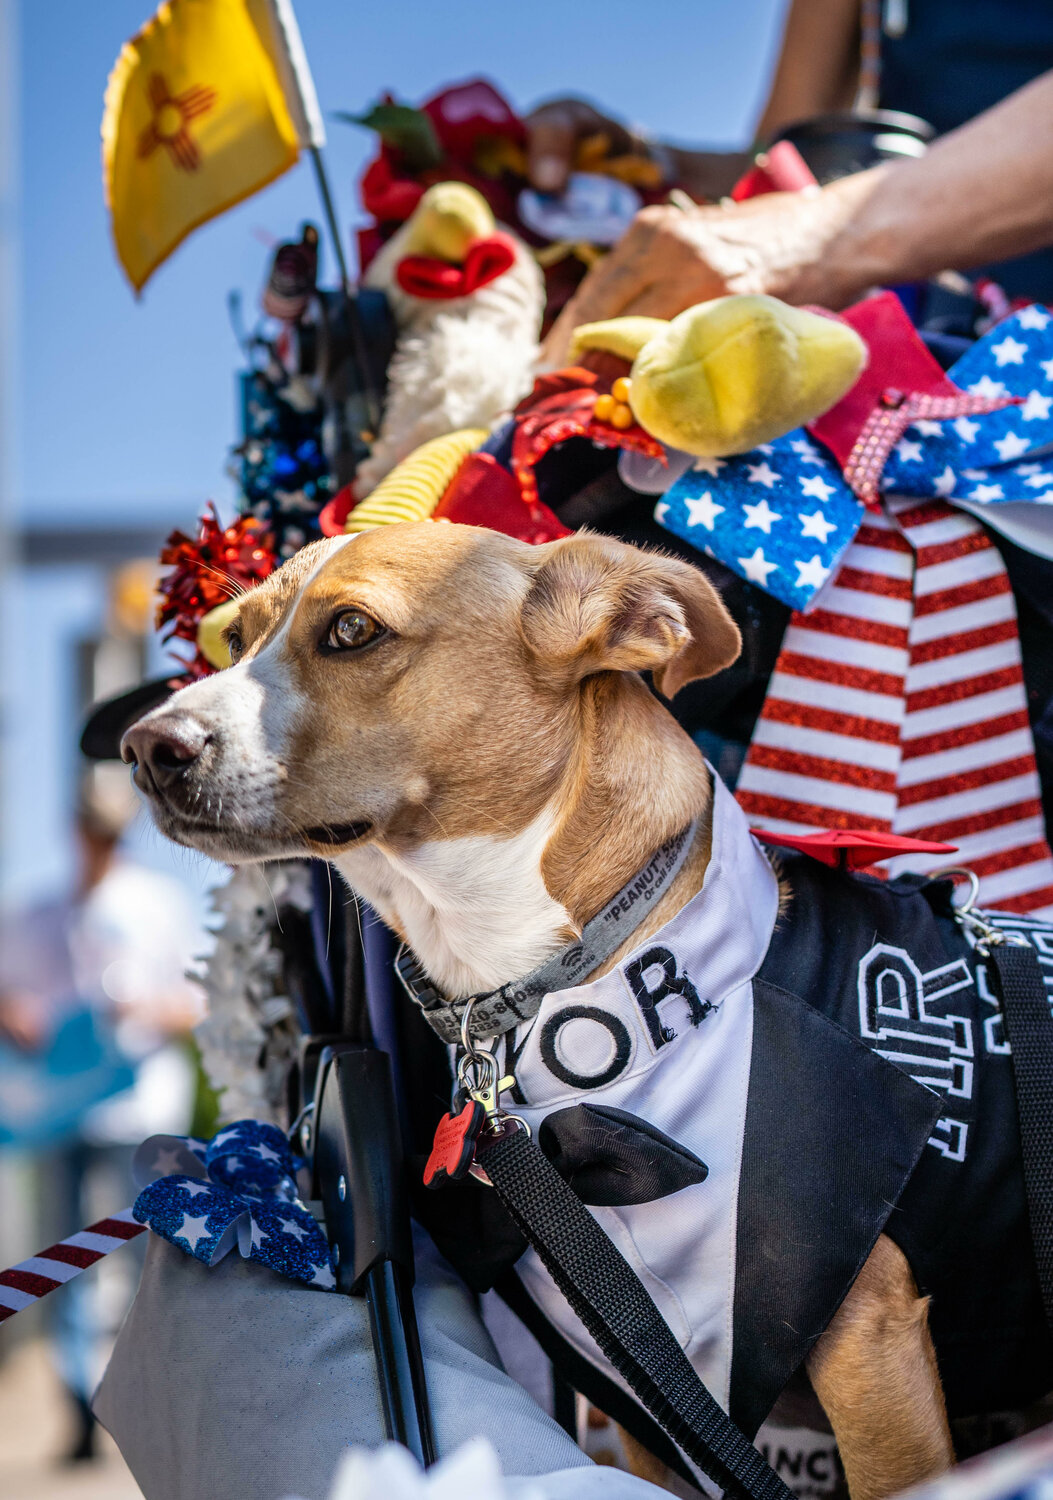 Peanut Butter, the Pet Mayor of the Corrales, was among the dignitaries that attended the village's Fourth of July parade. (Roberto E. Rosales/Corrales Comment)